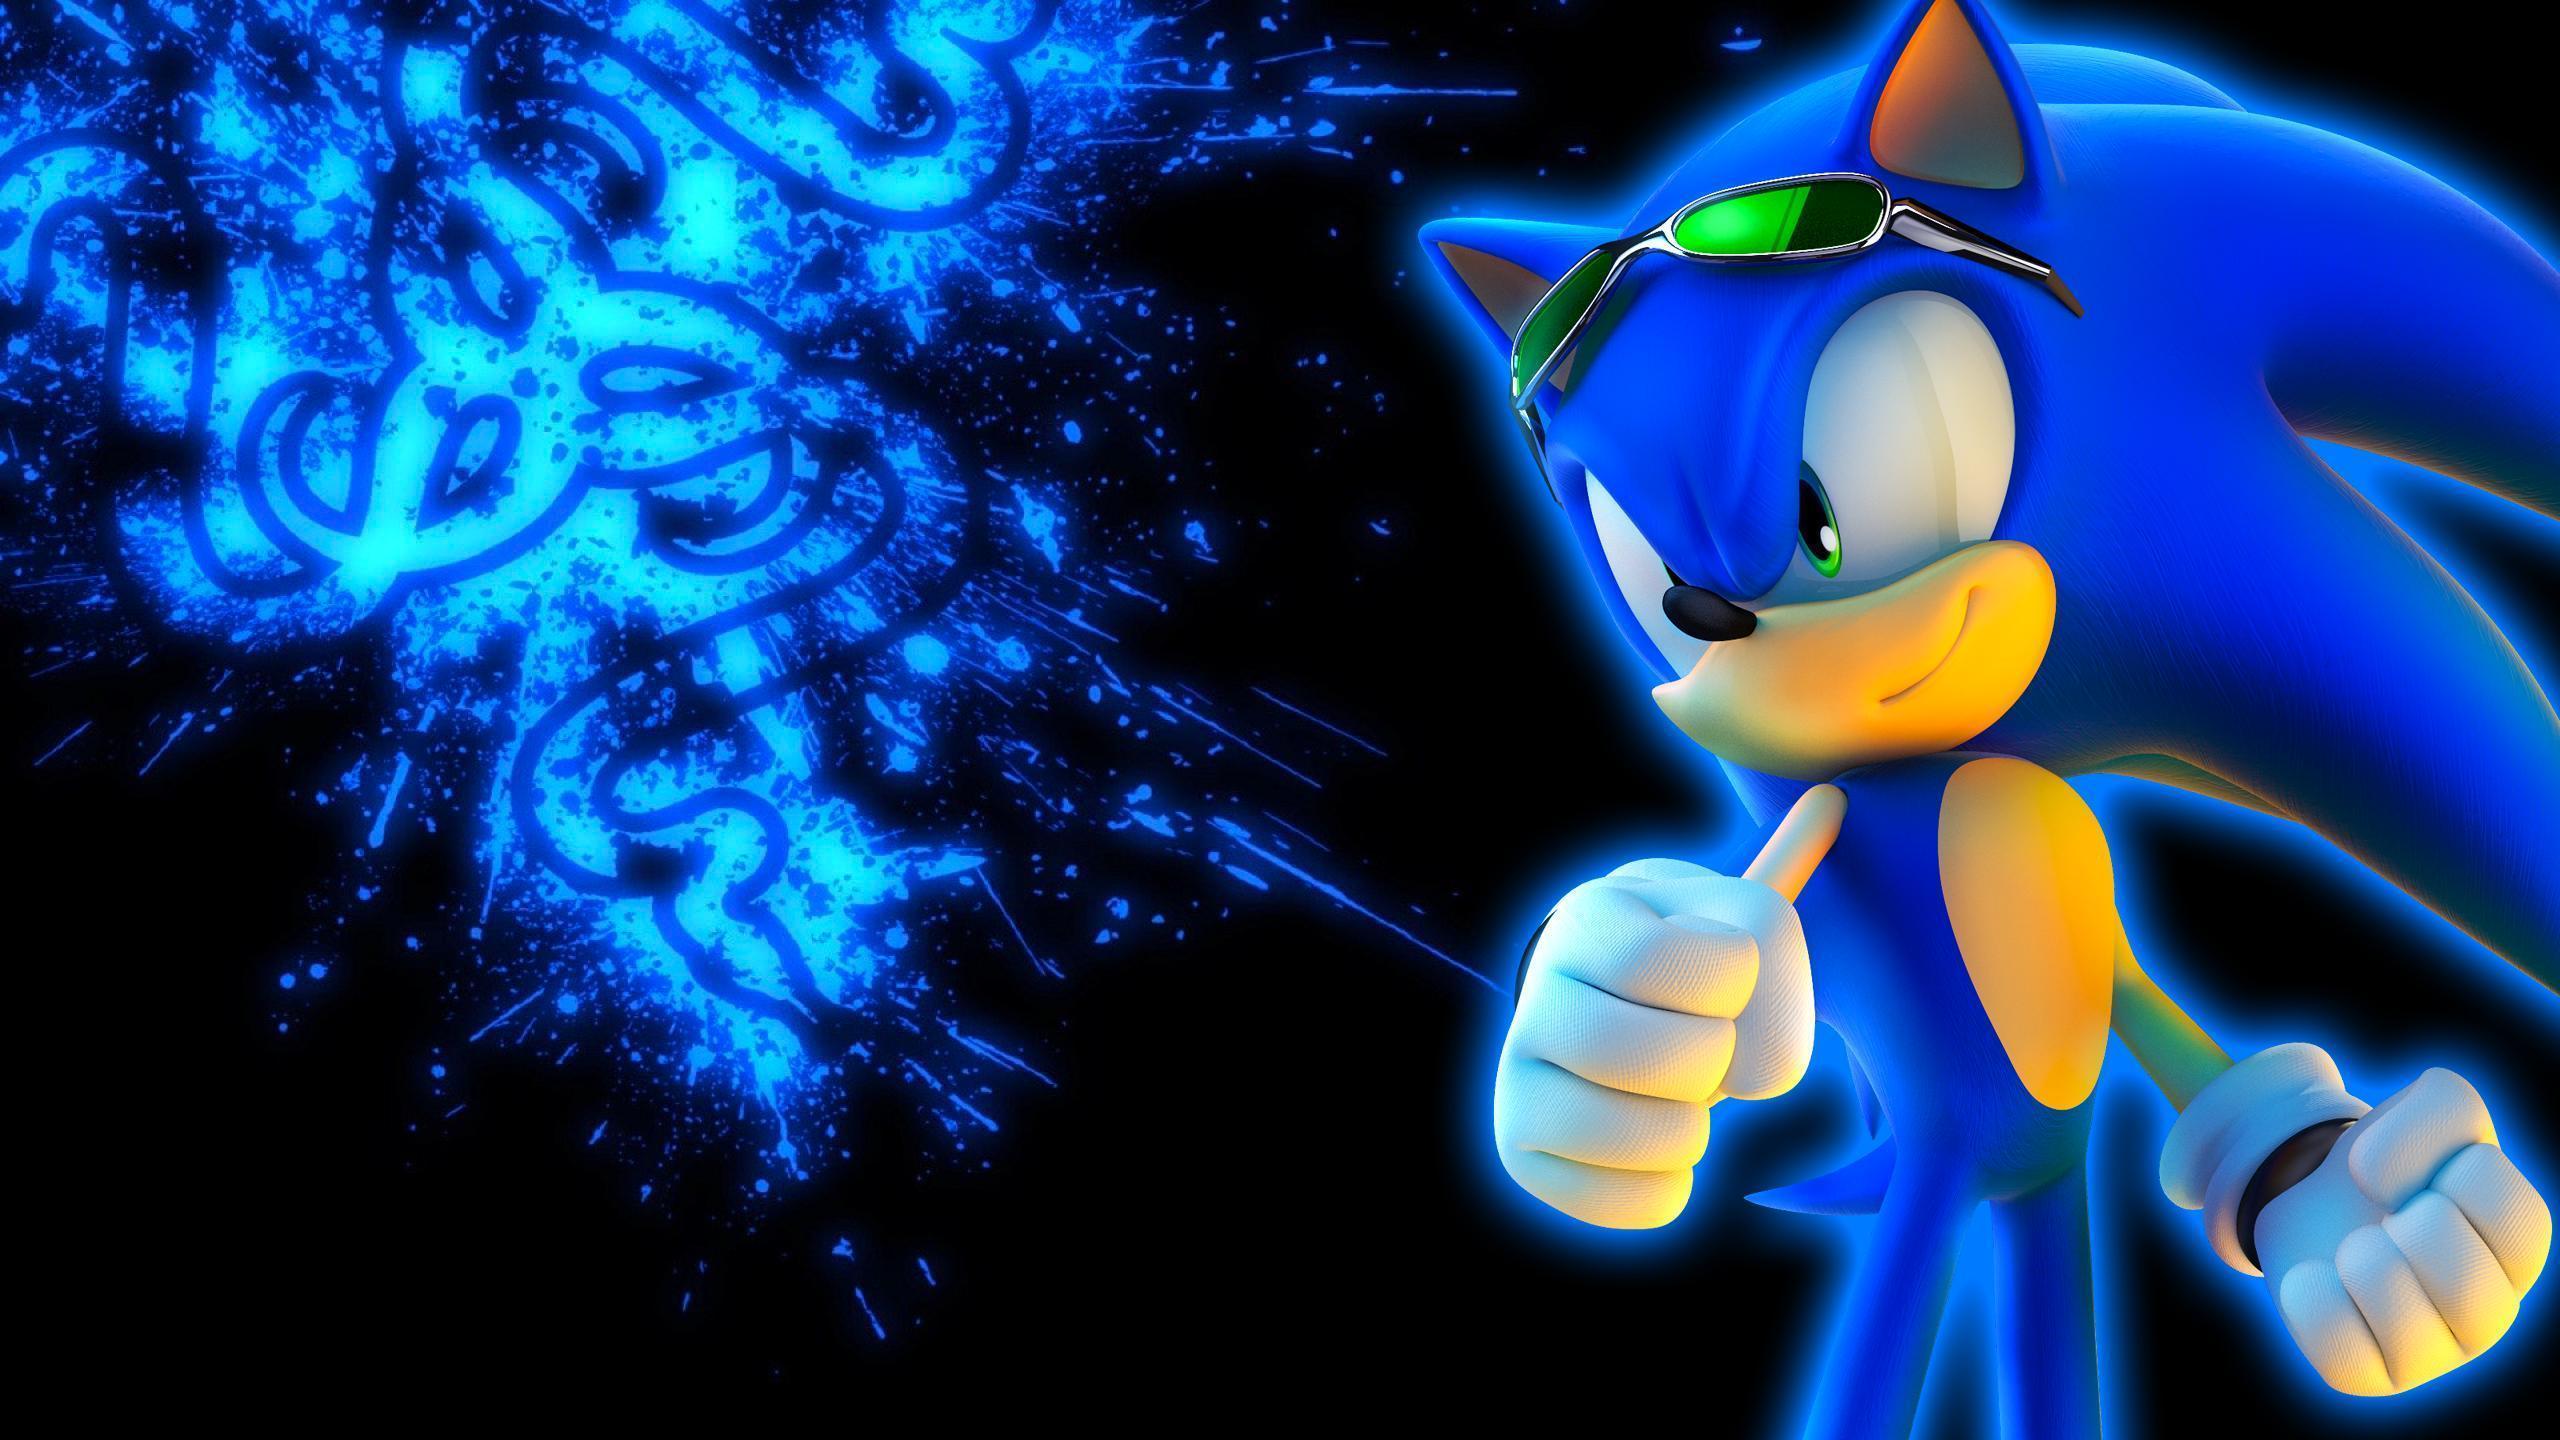 sonic knight cool wallpapers